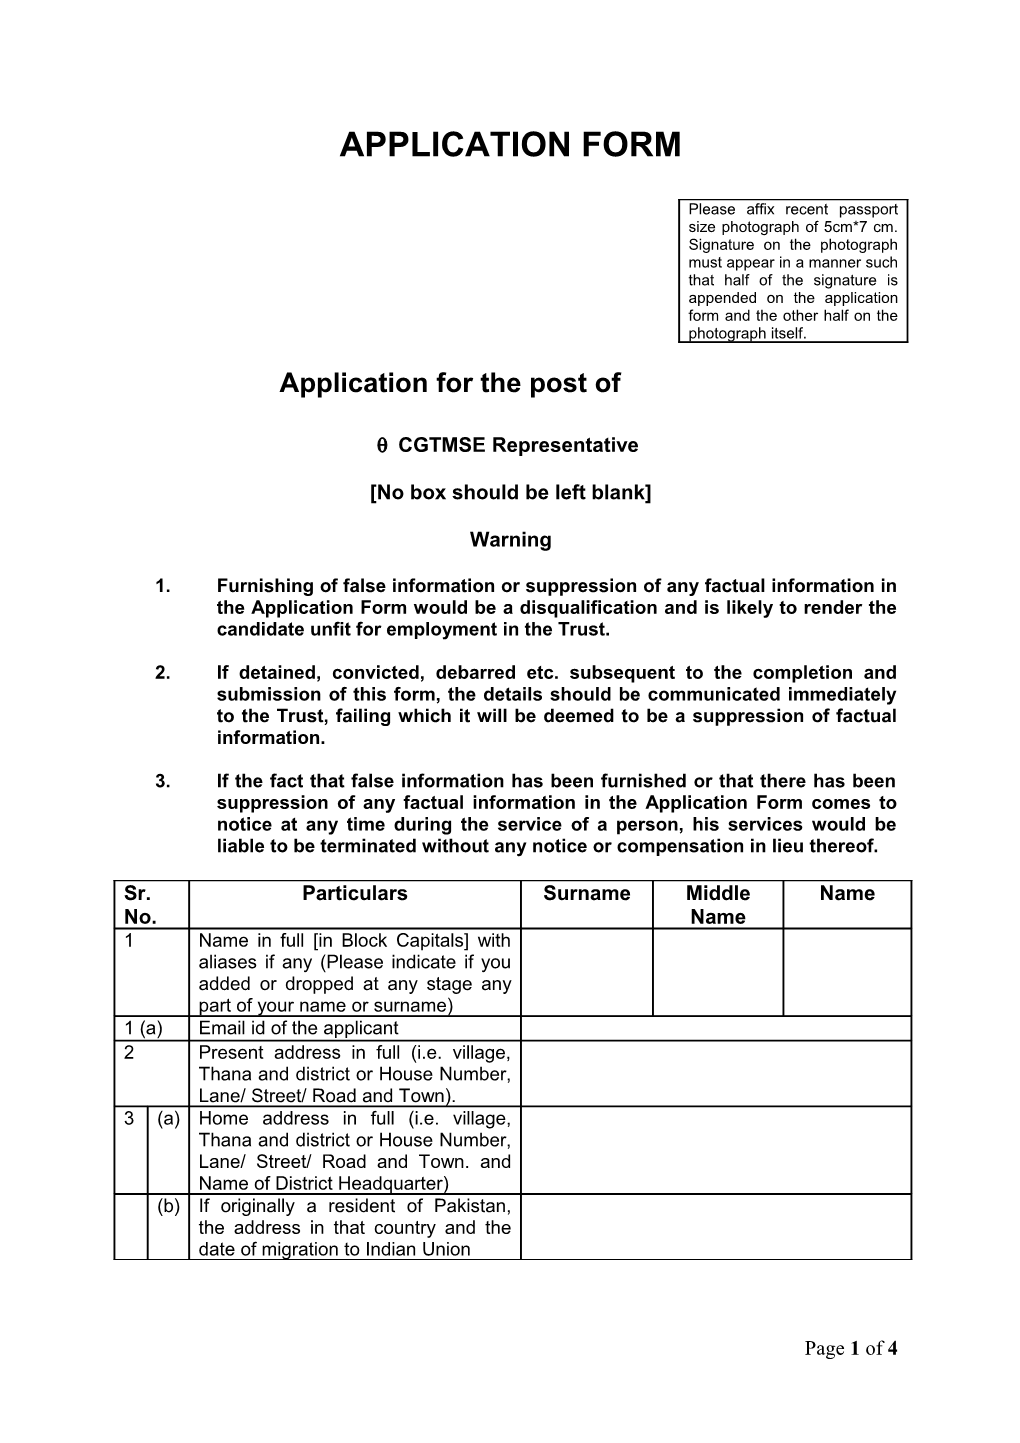 Application Form s32